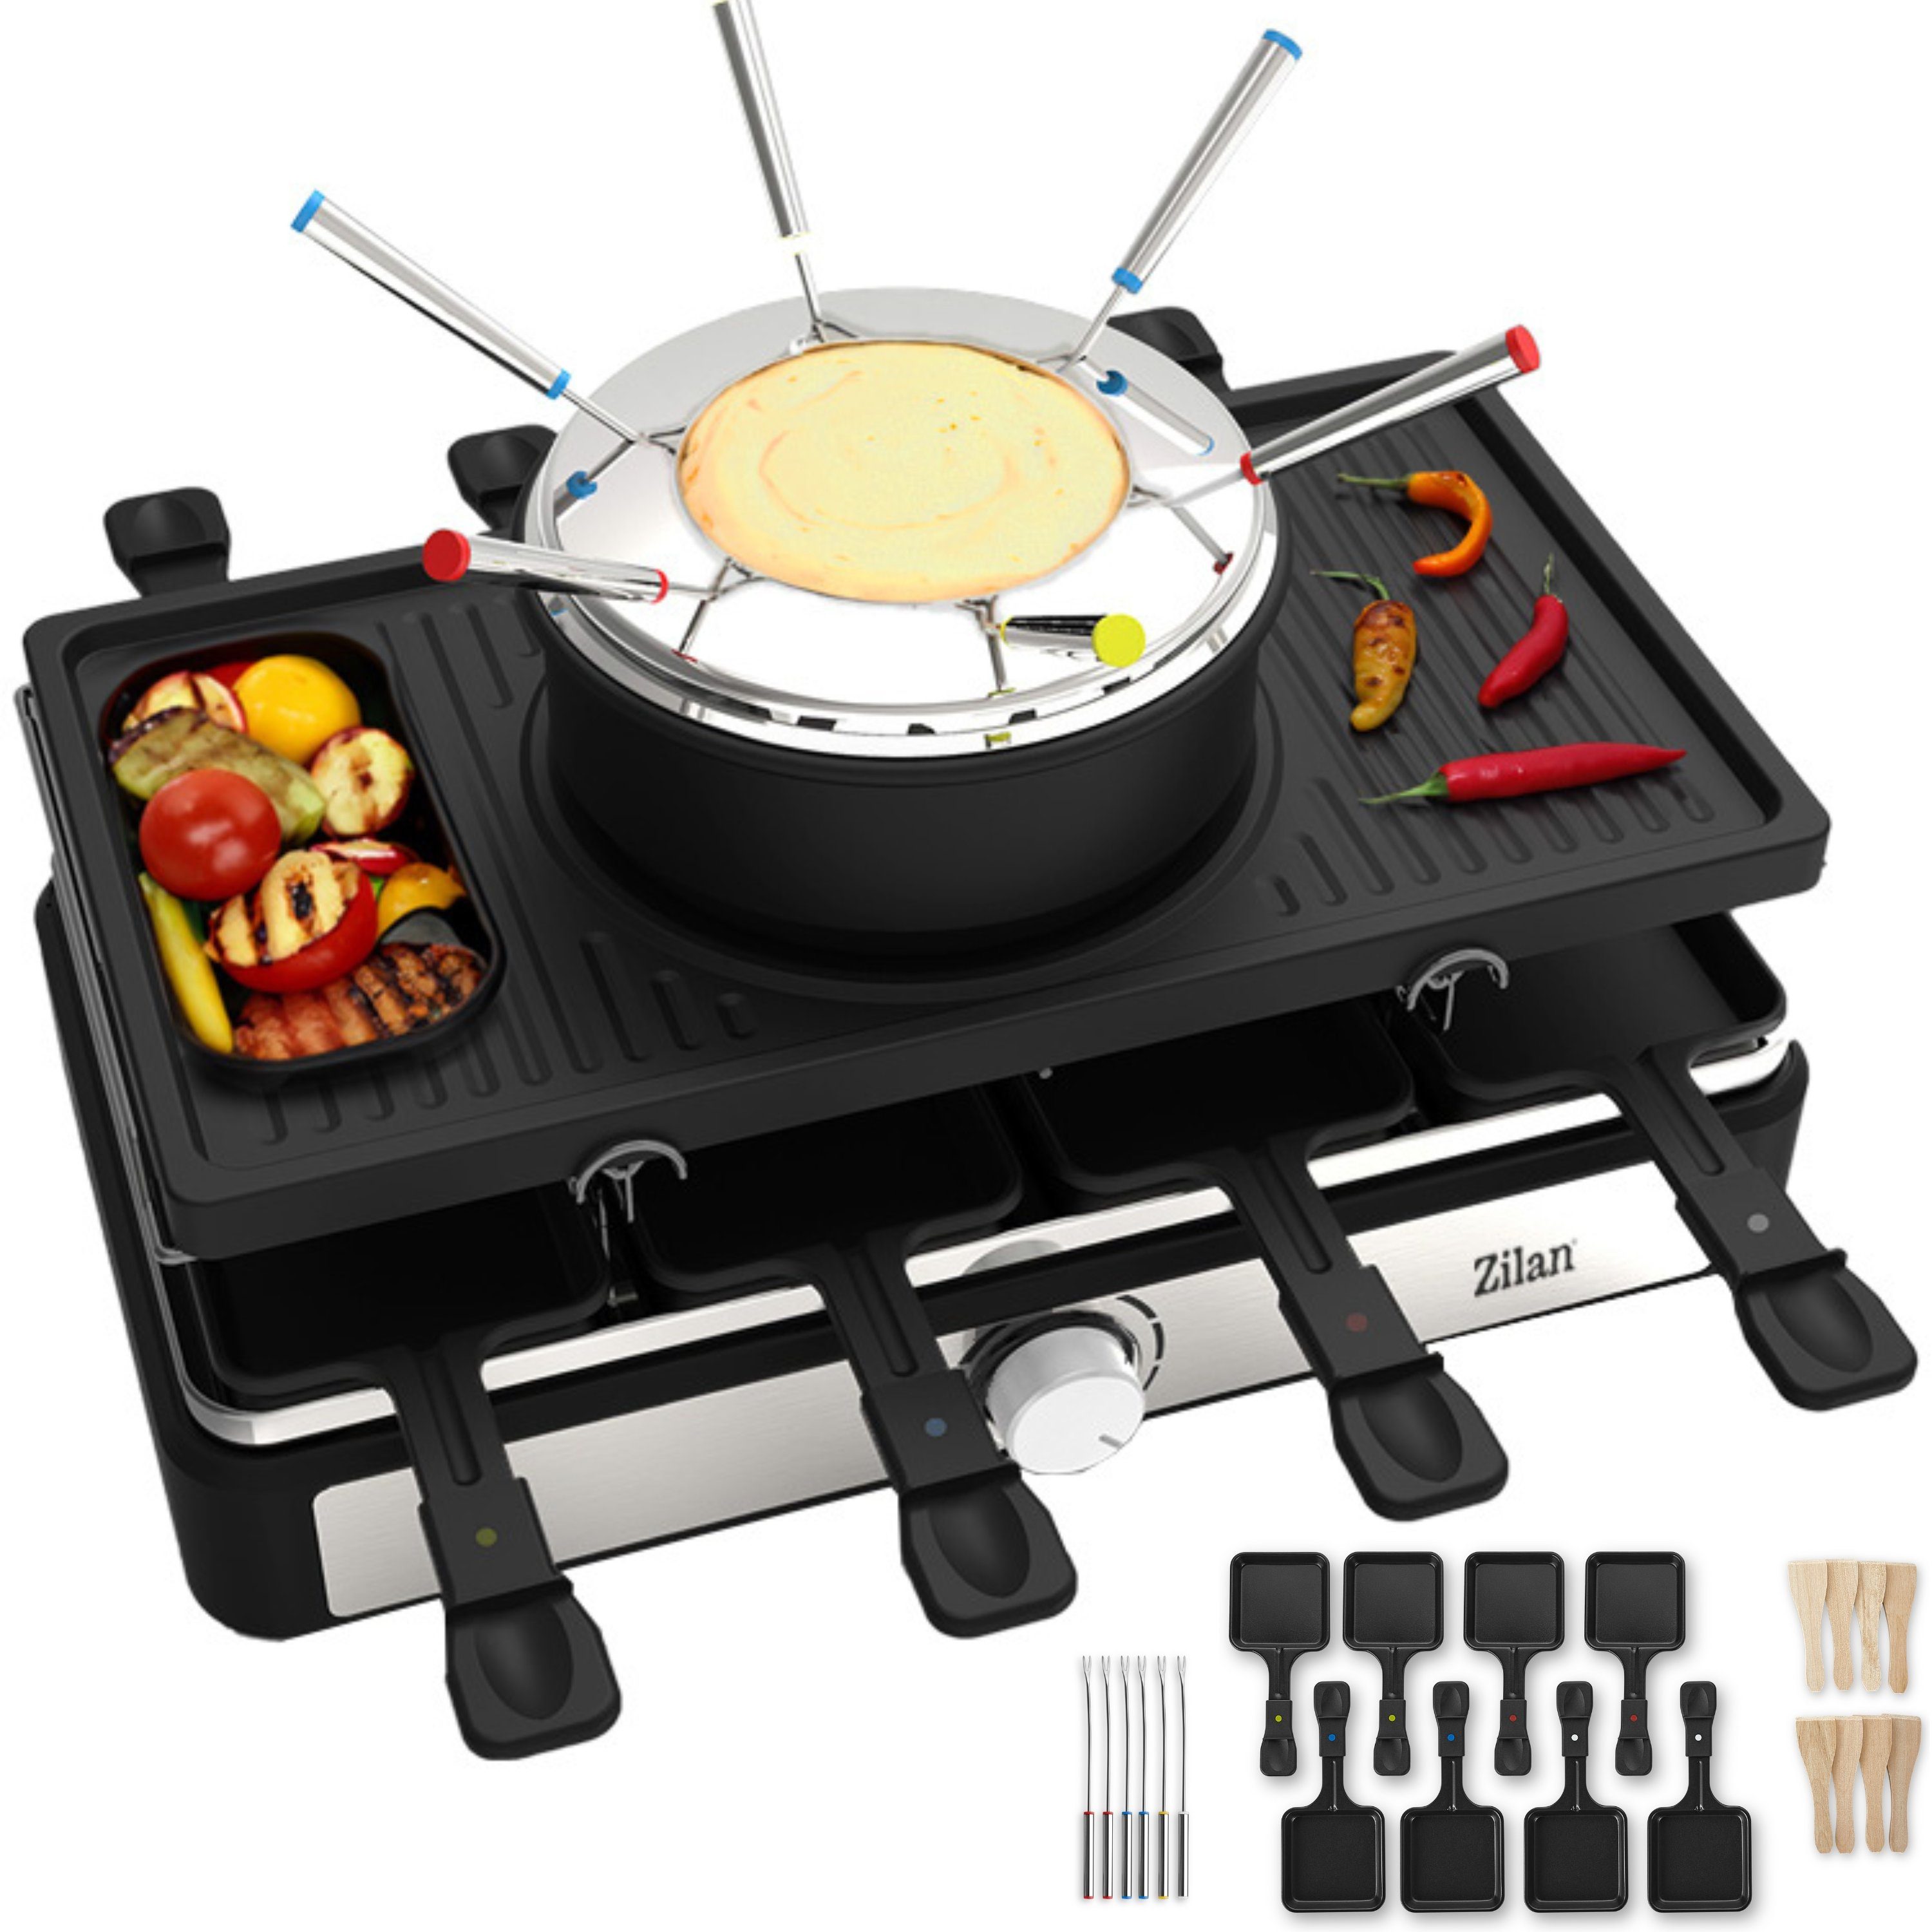 Raclettes online kaufen » Raclette-Grills | OTTO